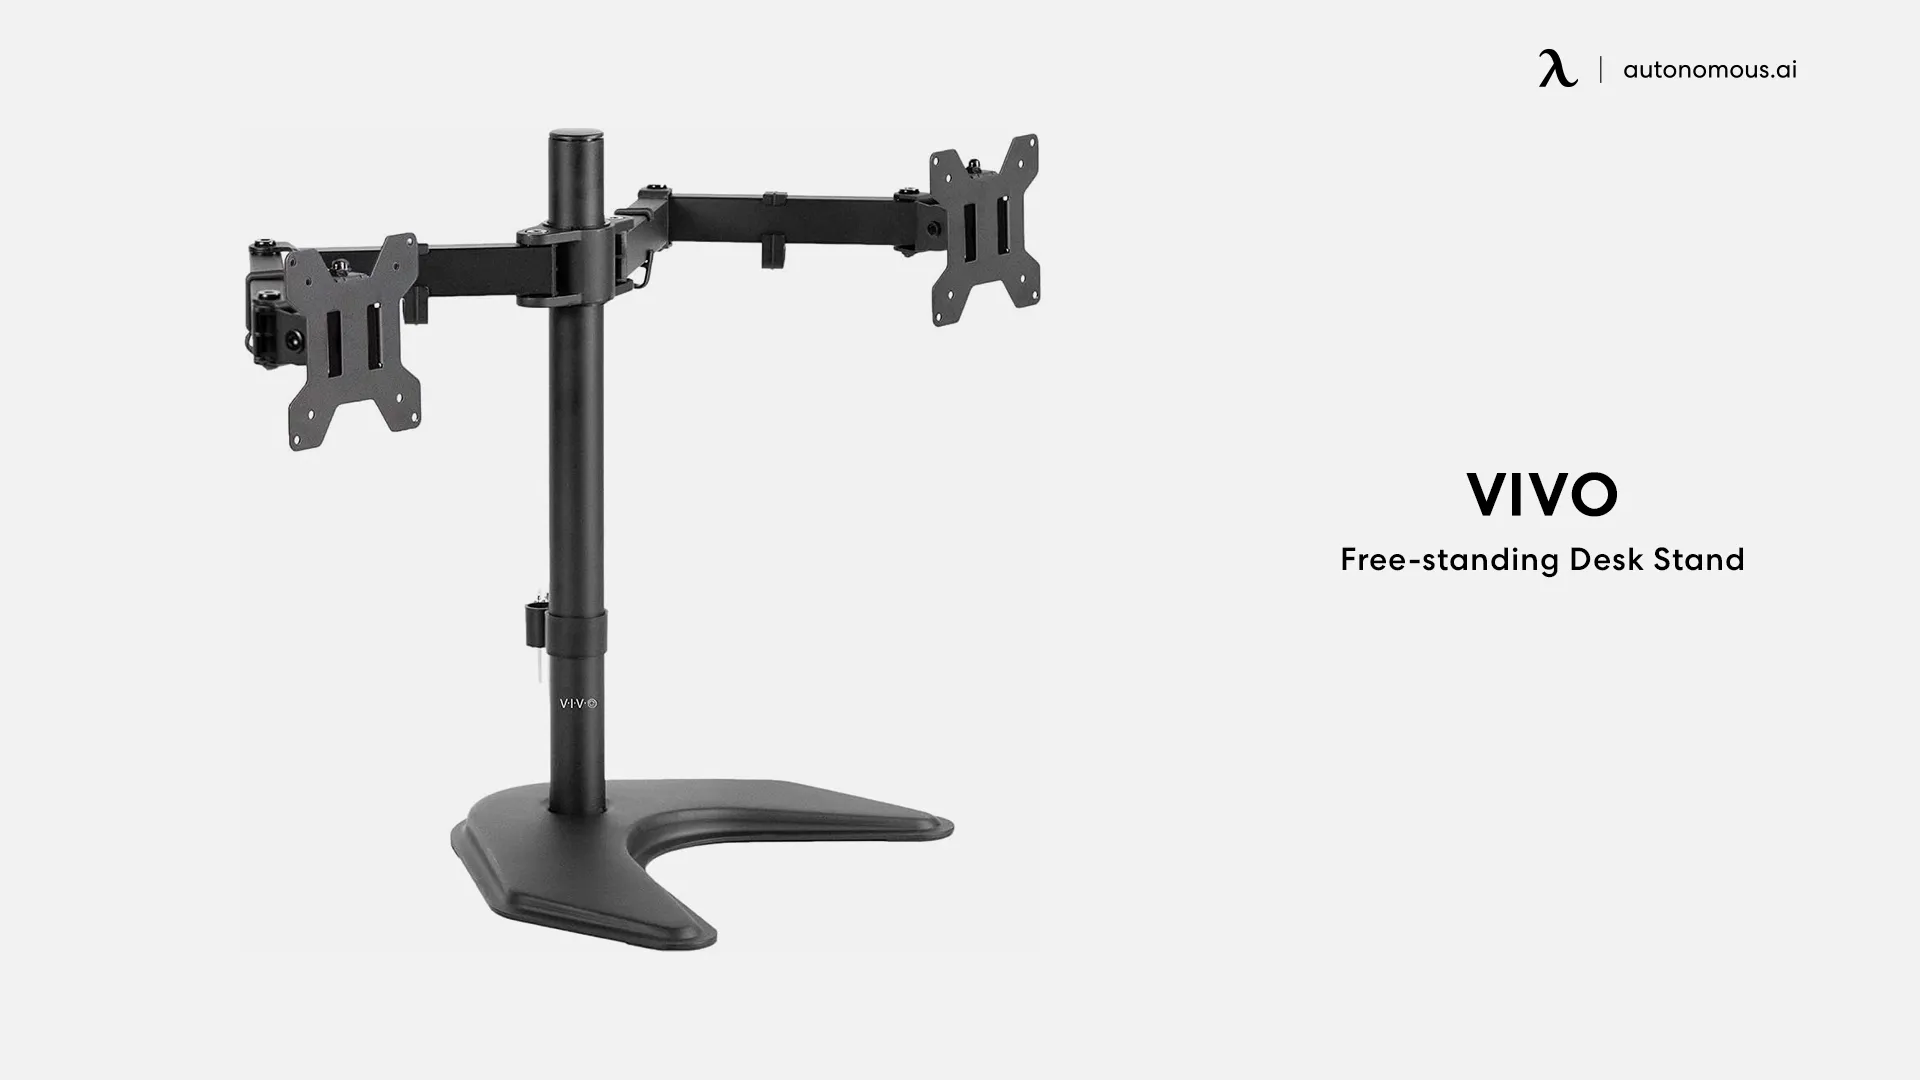 Free-standing Desk Stand by Vivo